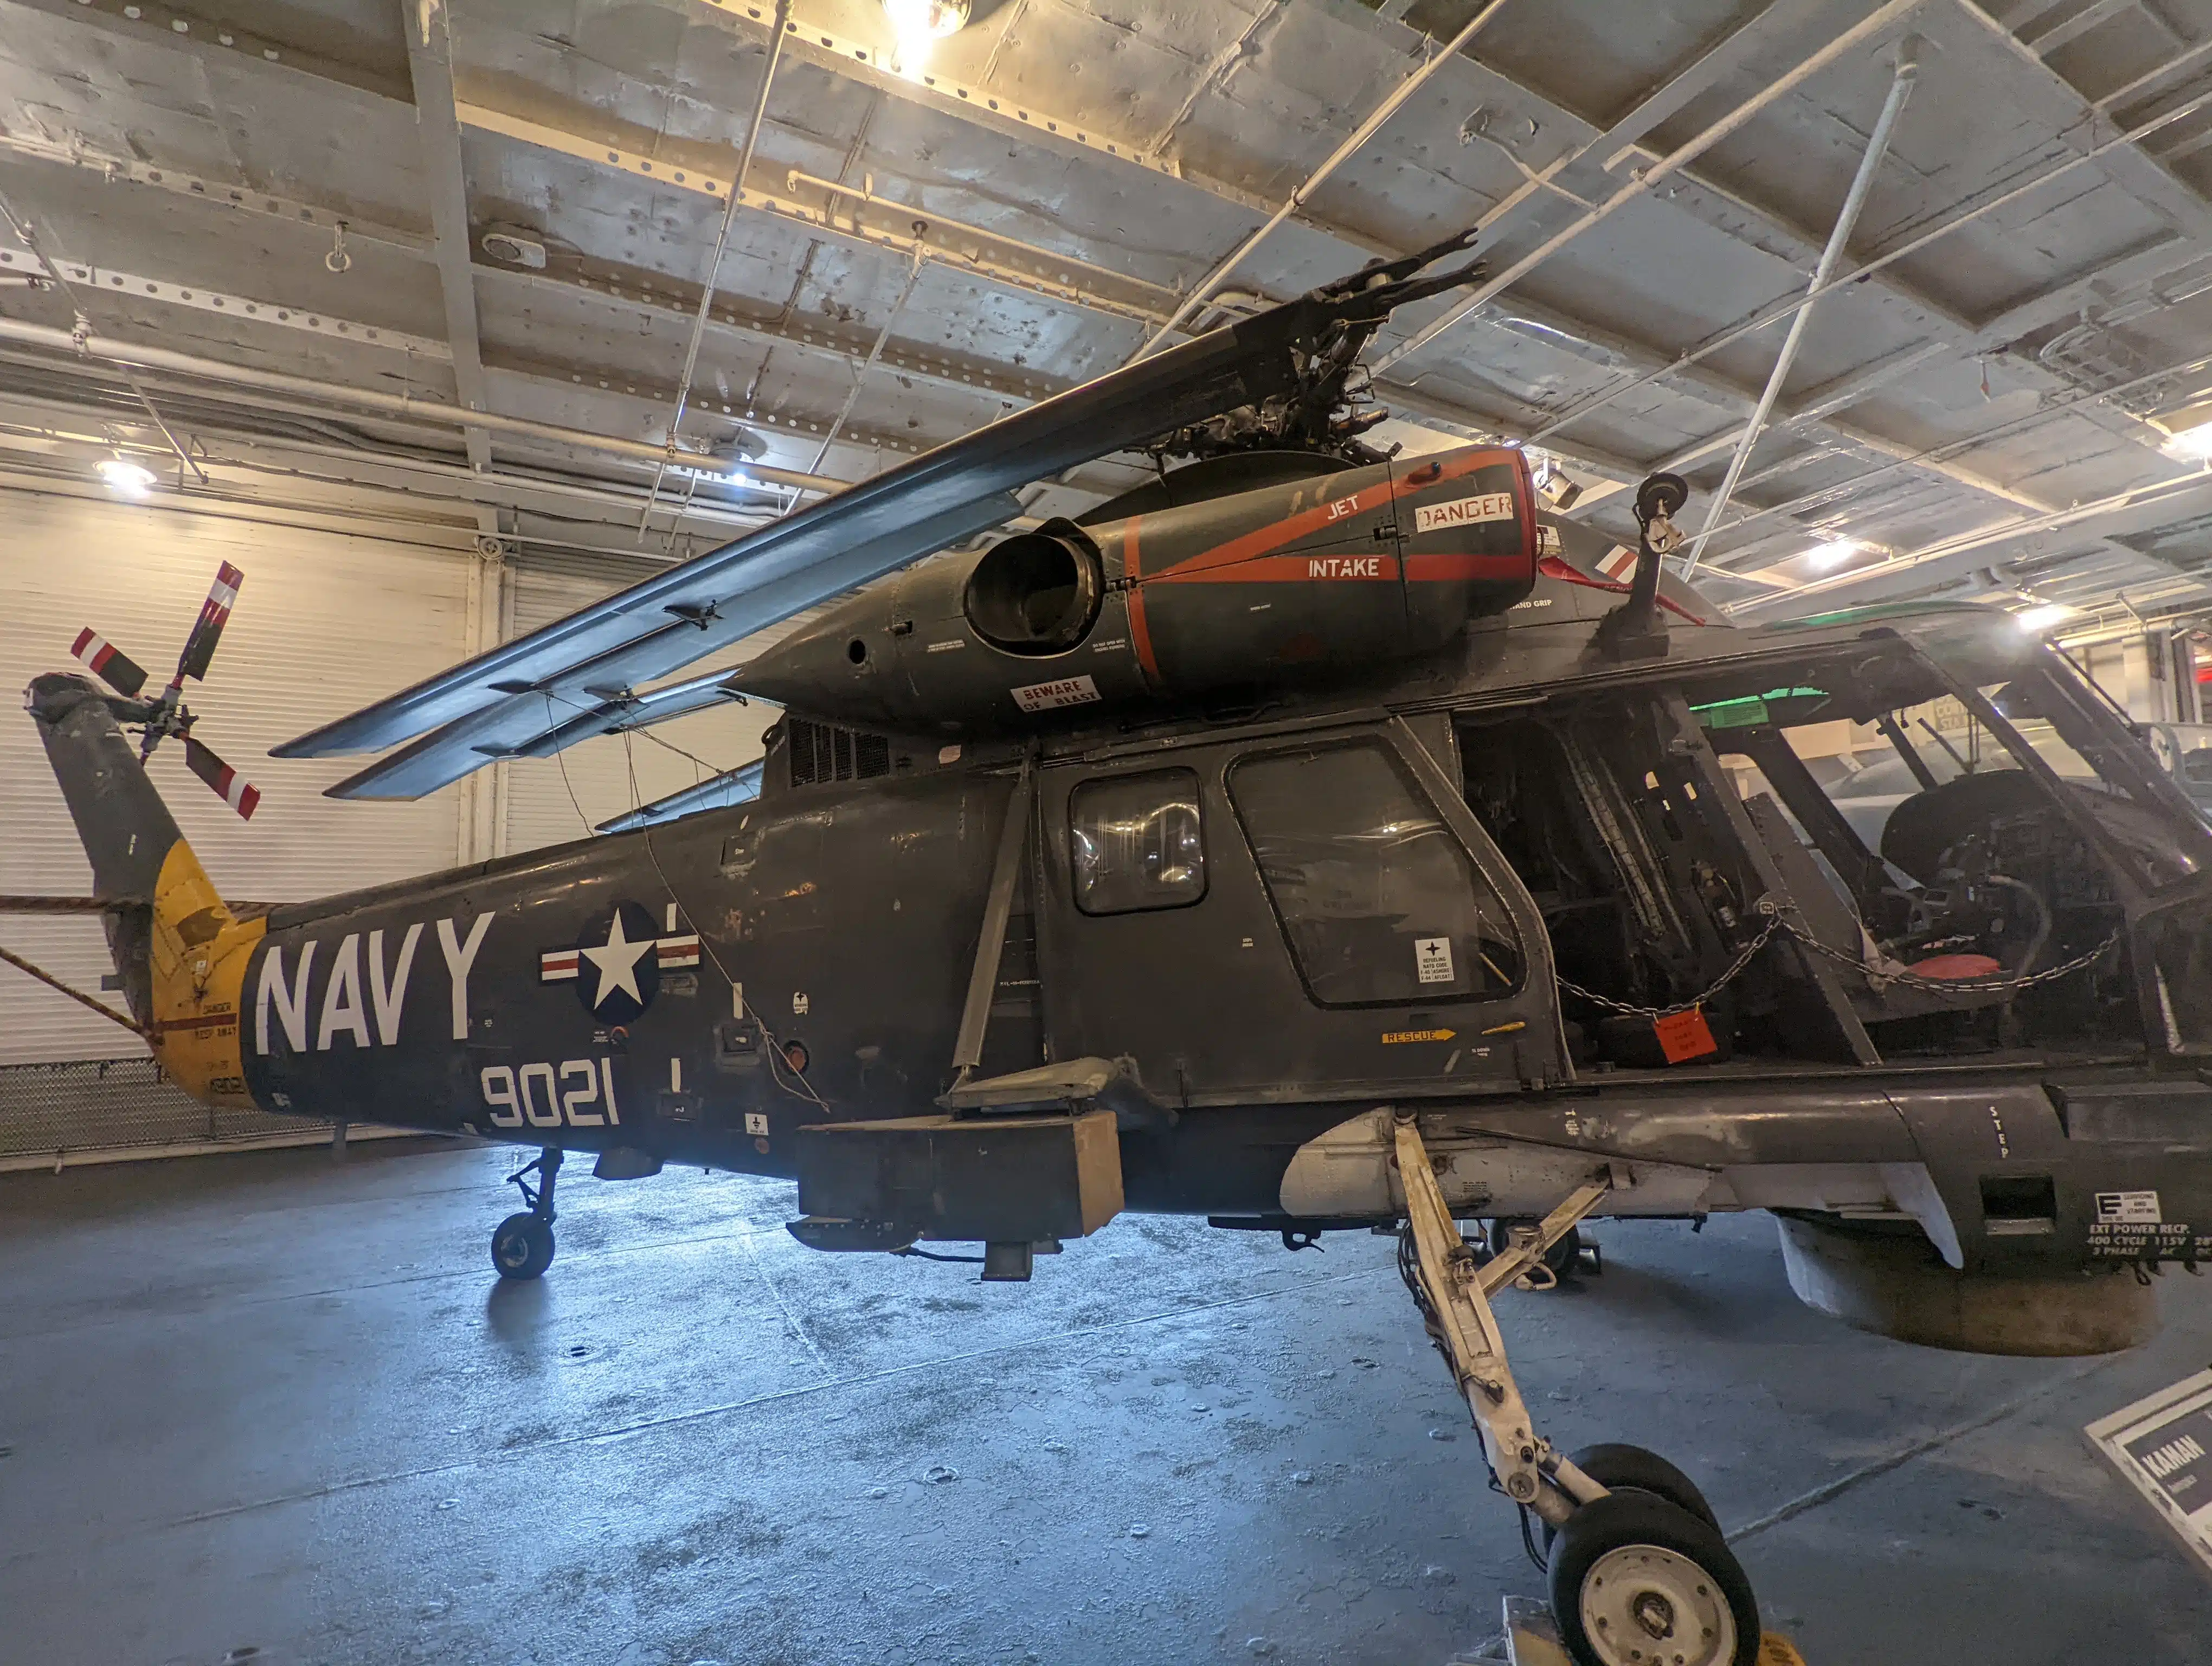 Aboard the hornet - navy copter